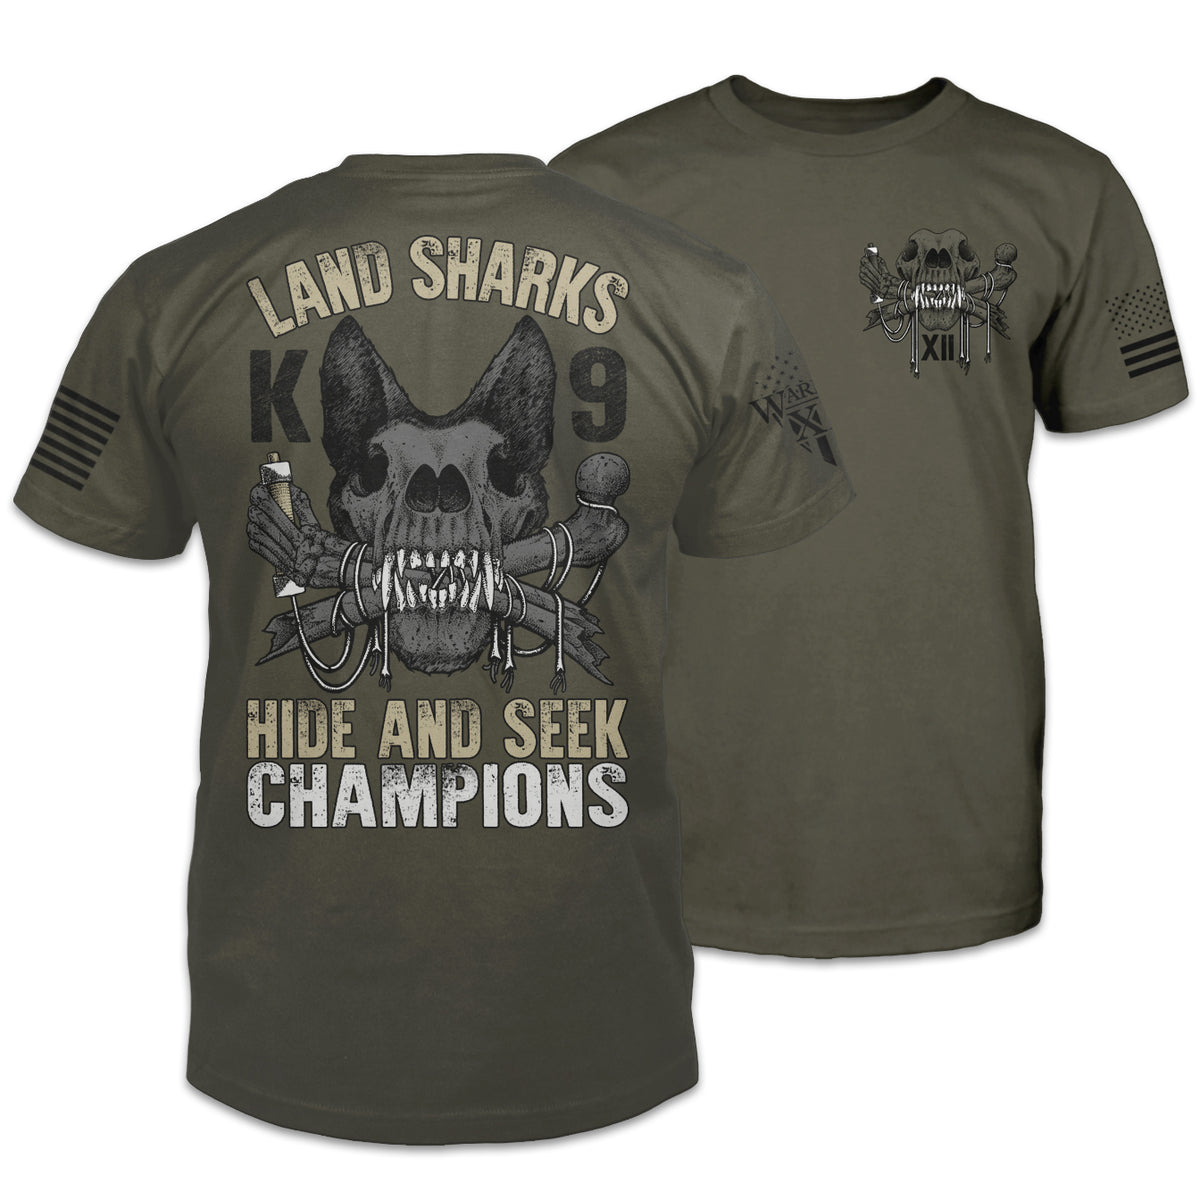 Front & back olive green t-shirt with the words "land shark" and a the skeleton of k9 police dog printed on the shirt.